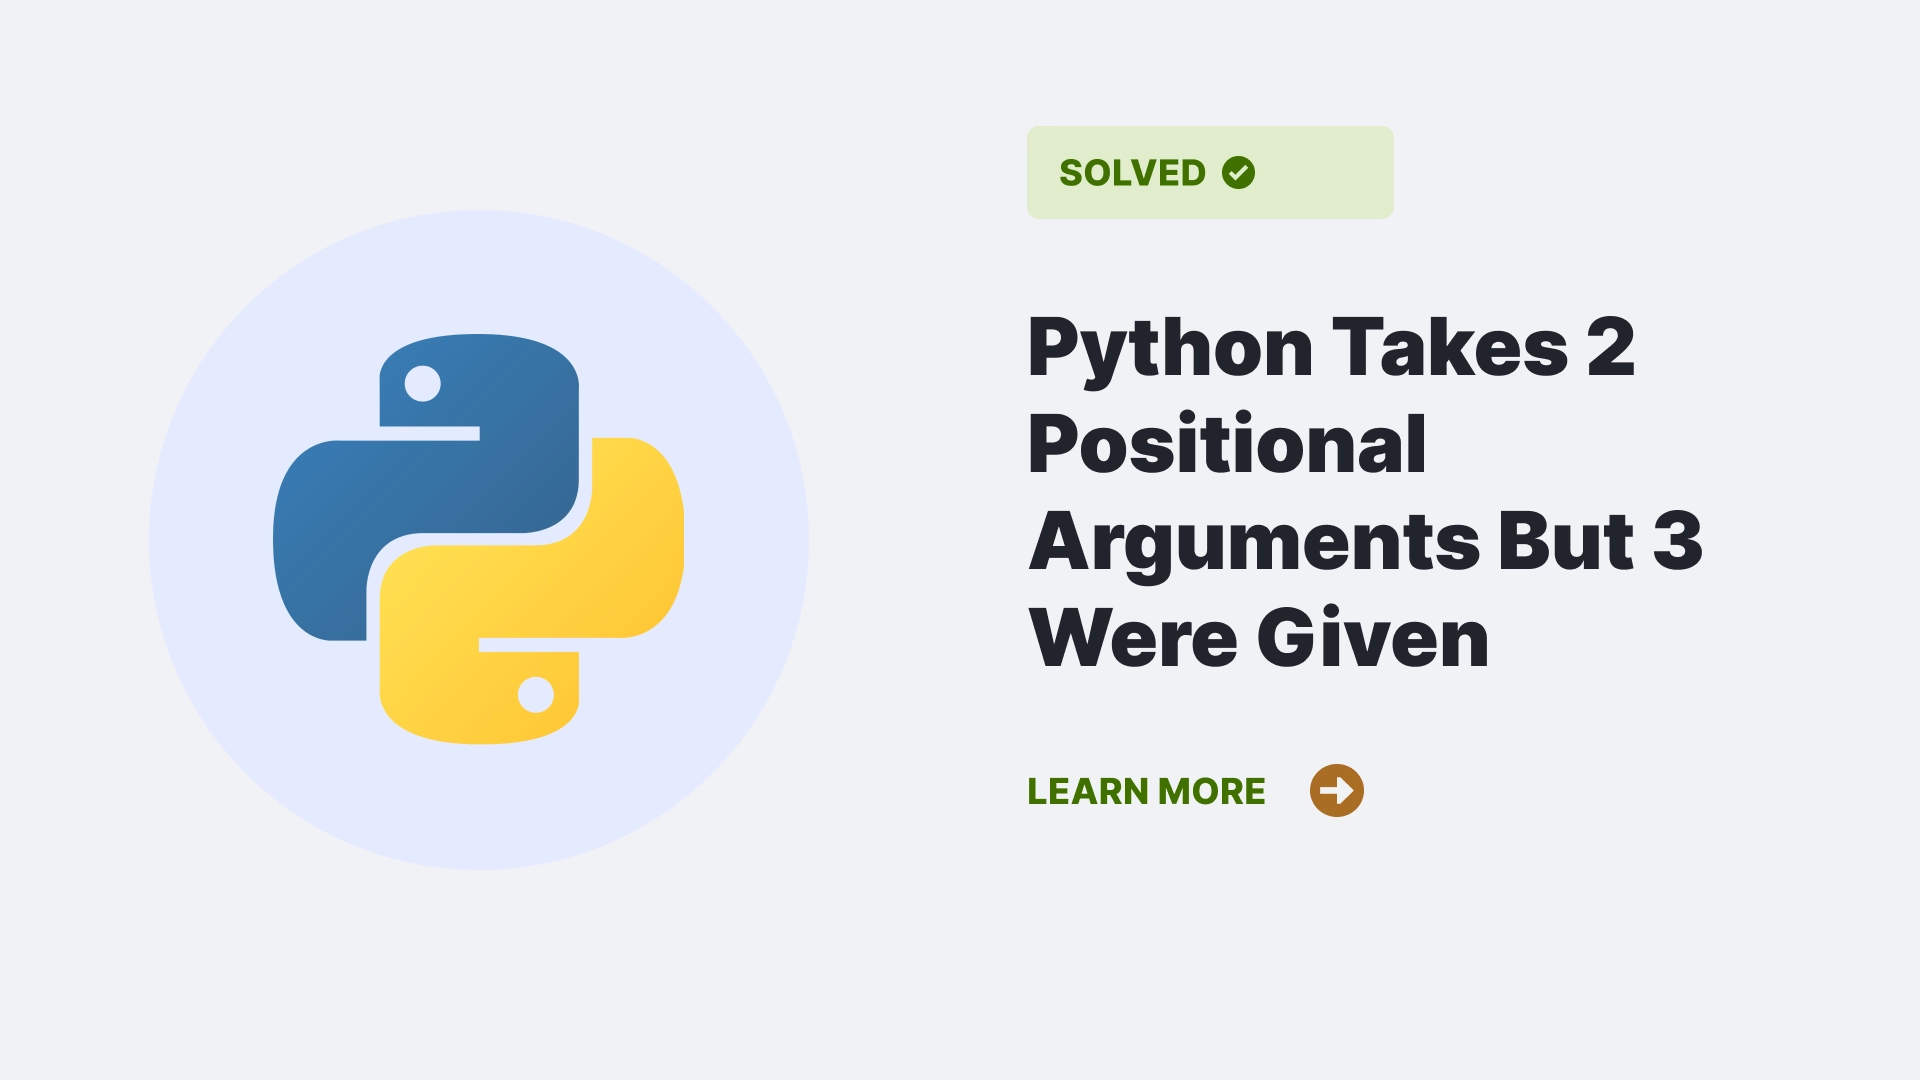 Python Takes 2 Positional Arguments But 3 Were Given